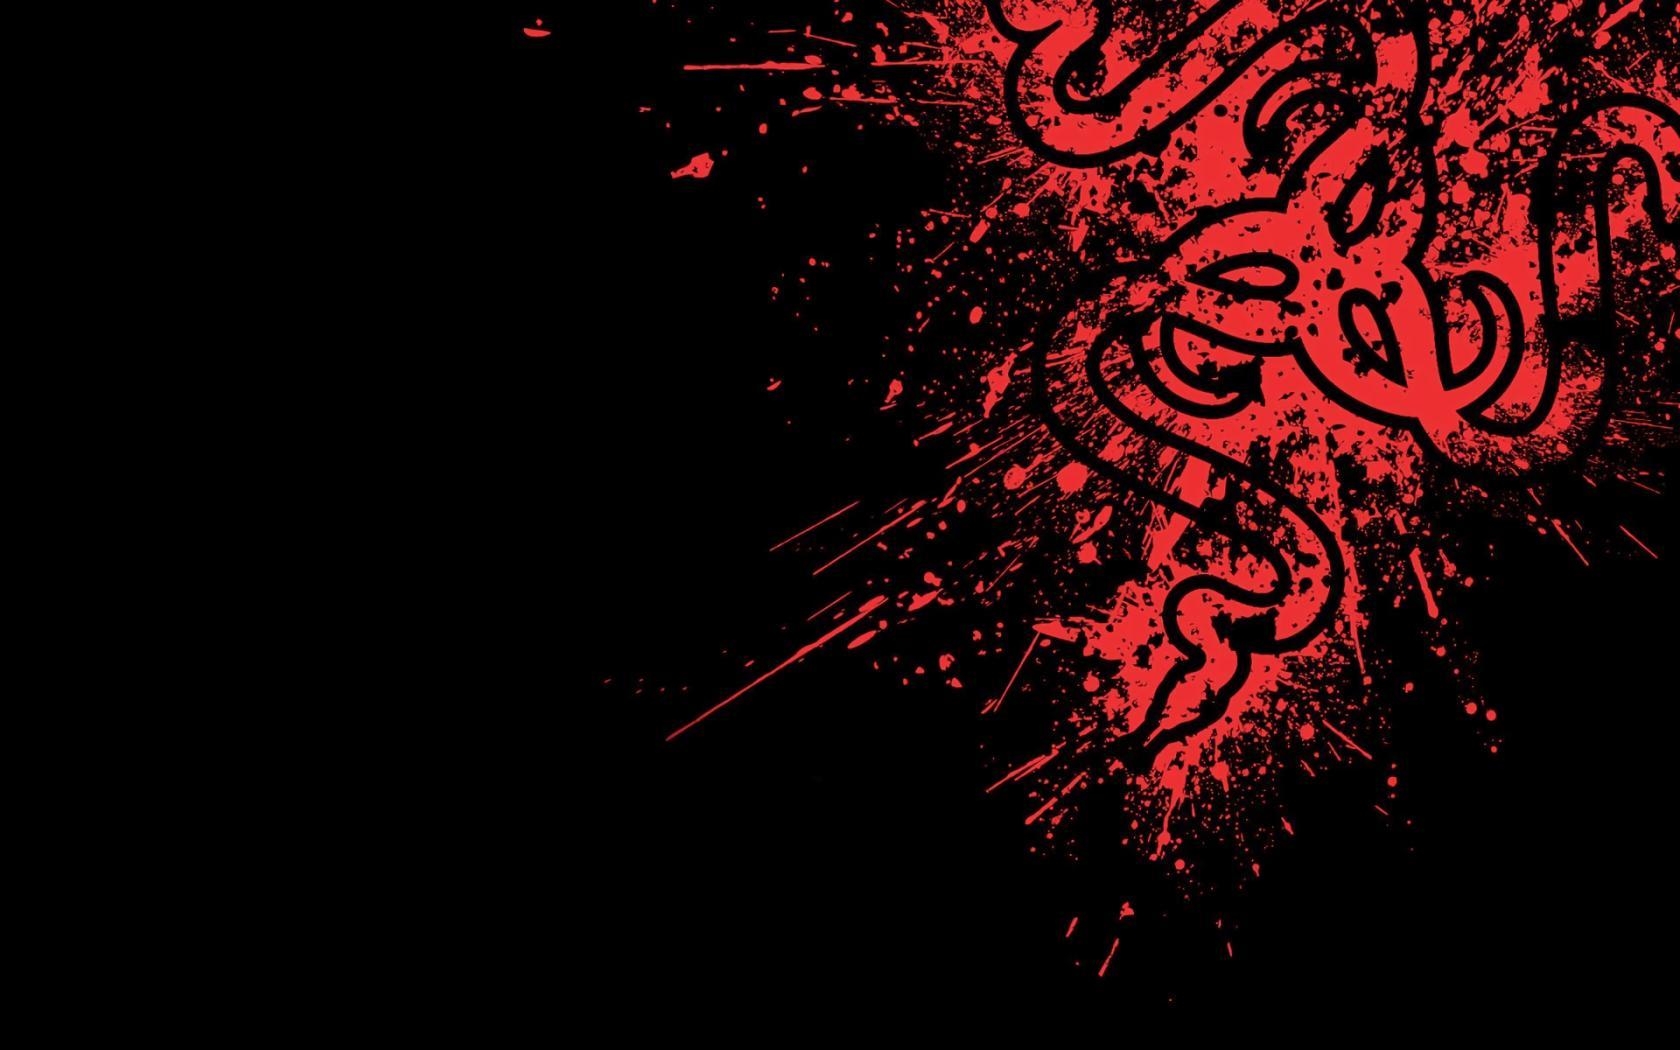 Cool Red Logo - Cool Red And Black Wallpaper Of Razer's Logo